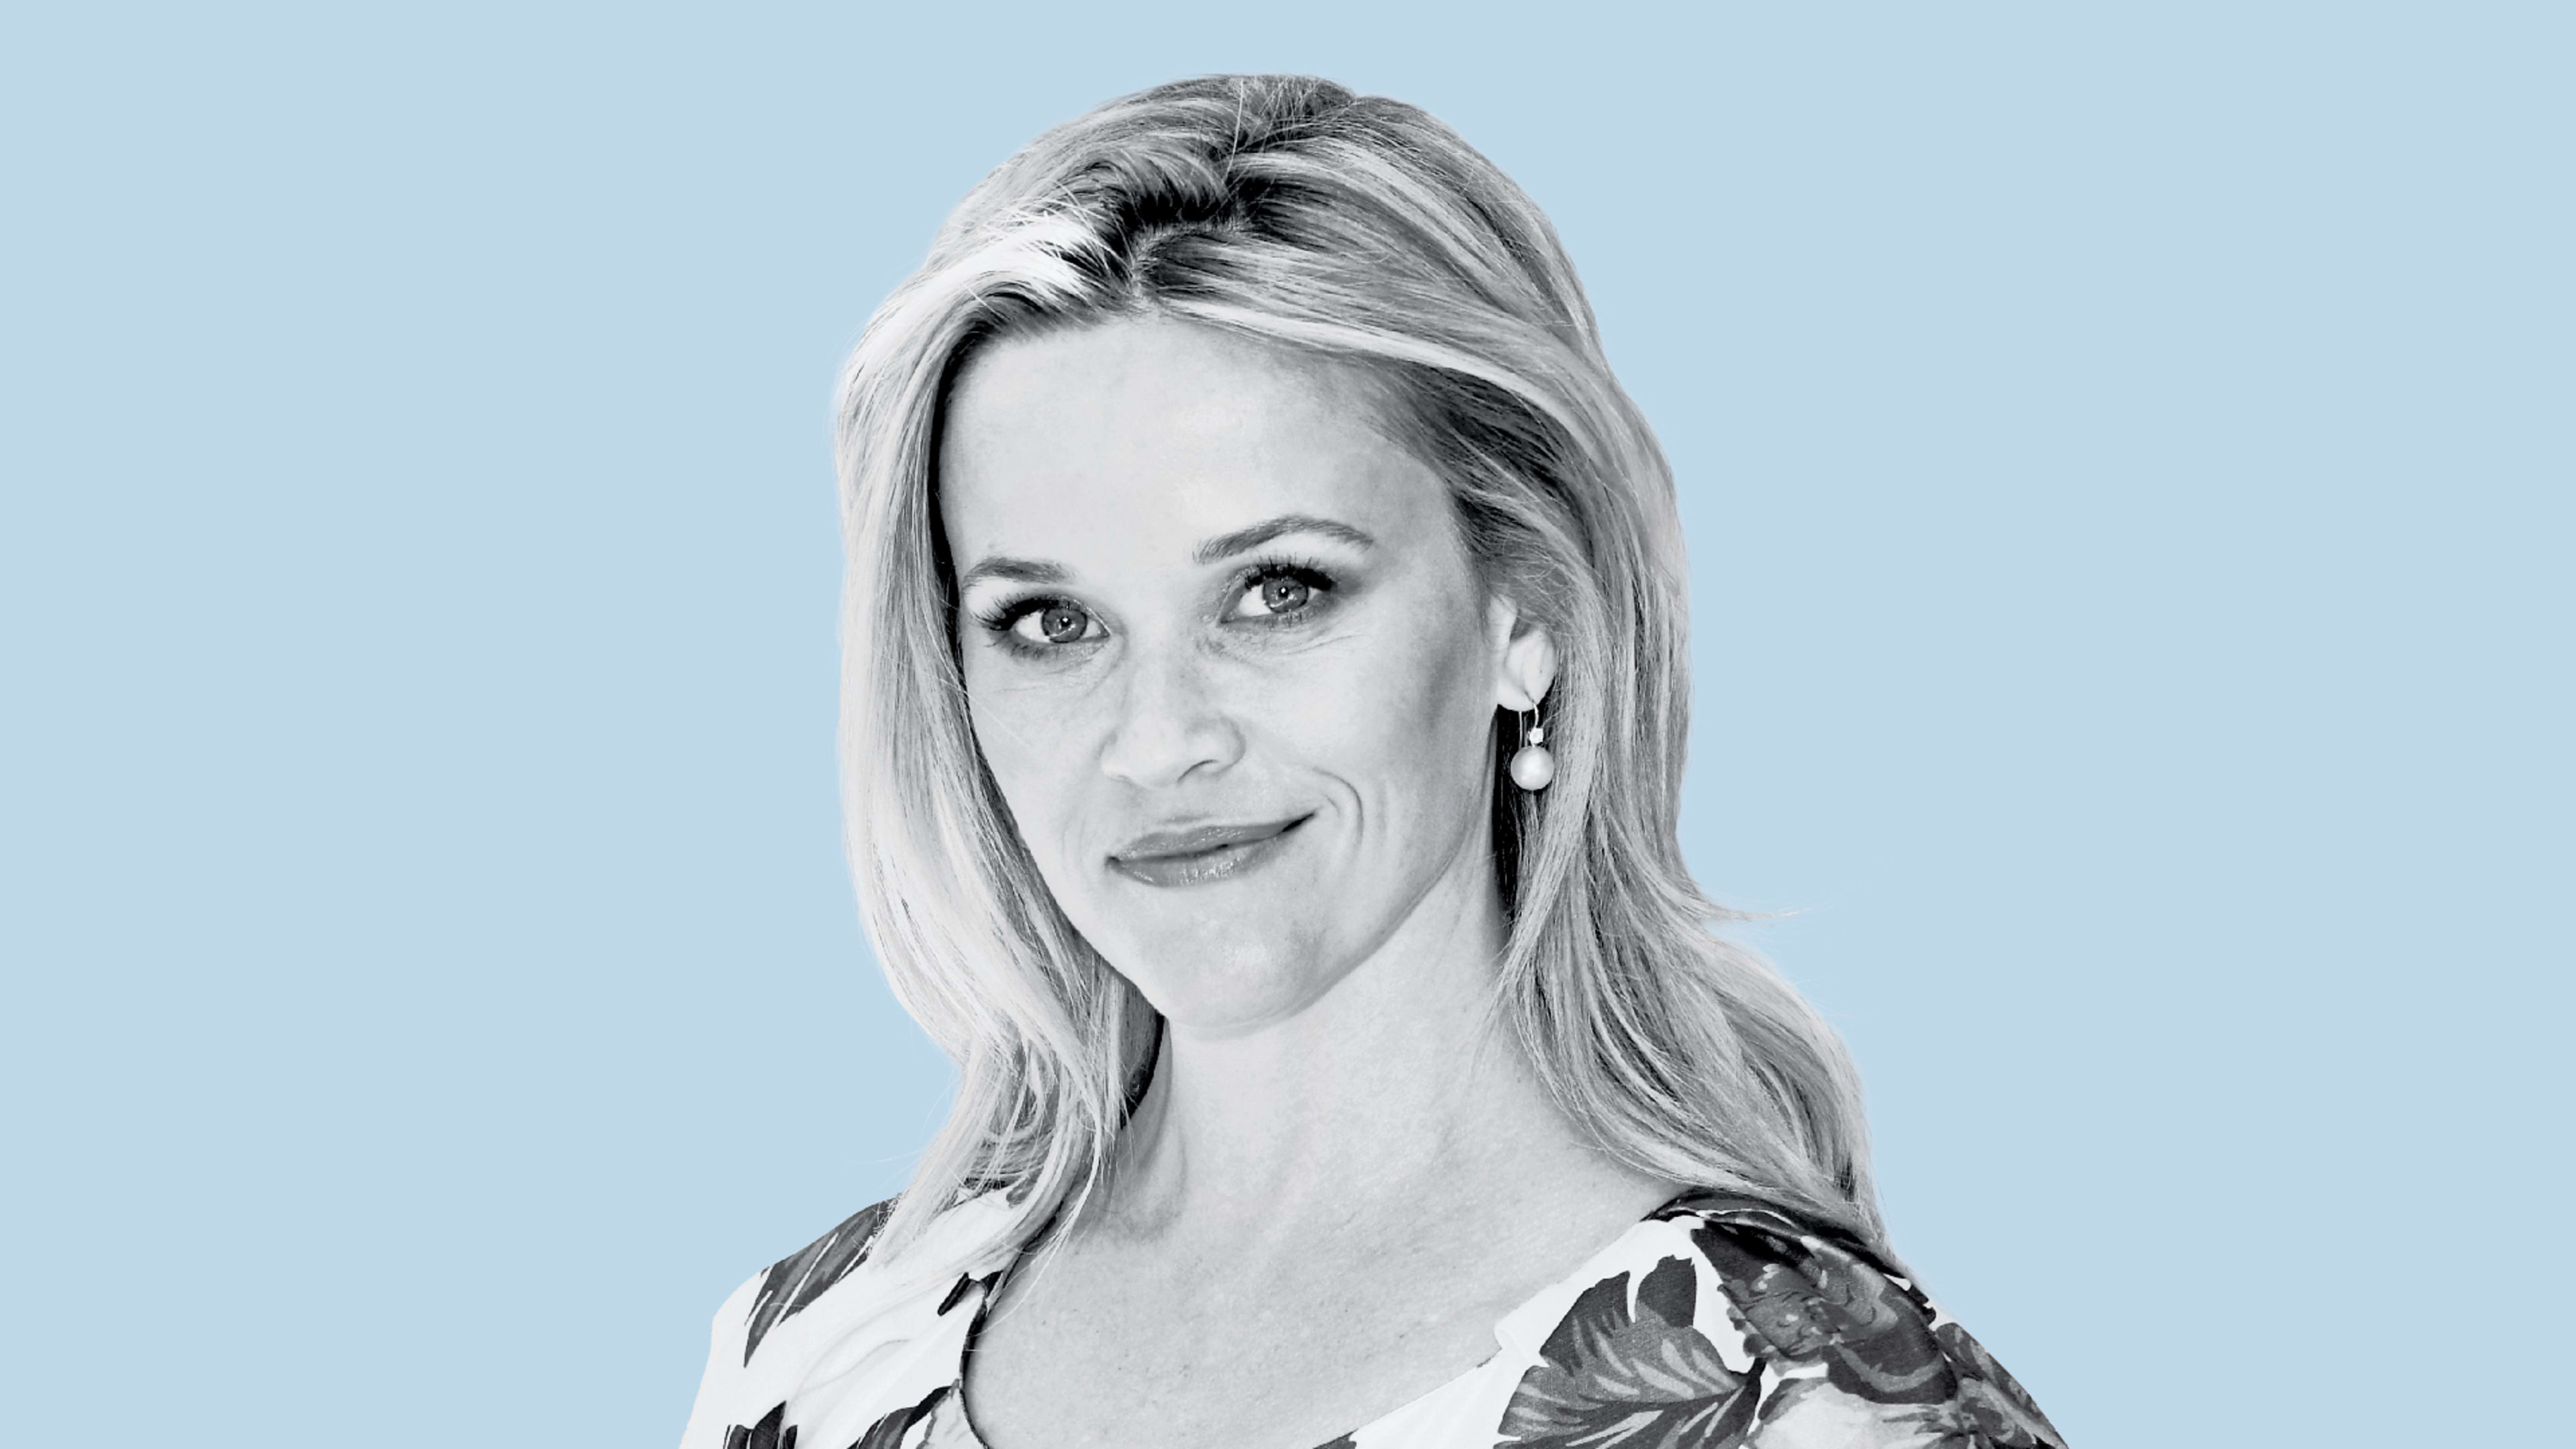 A day in the life of Reese Witherspoon